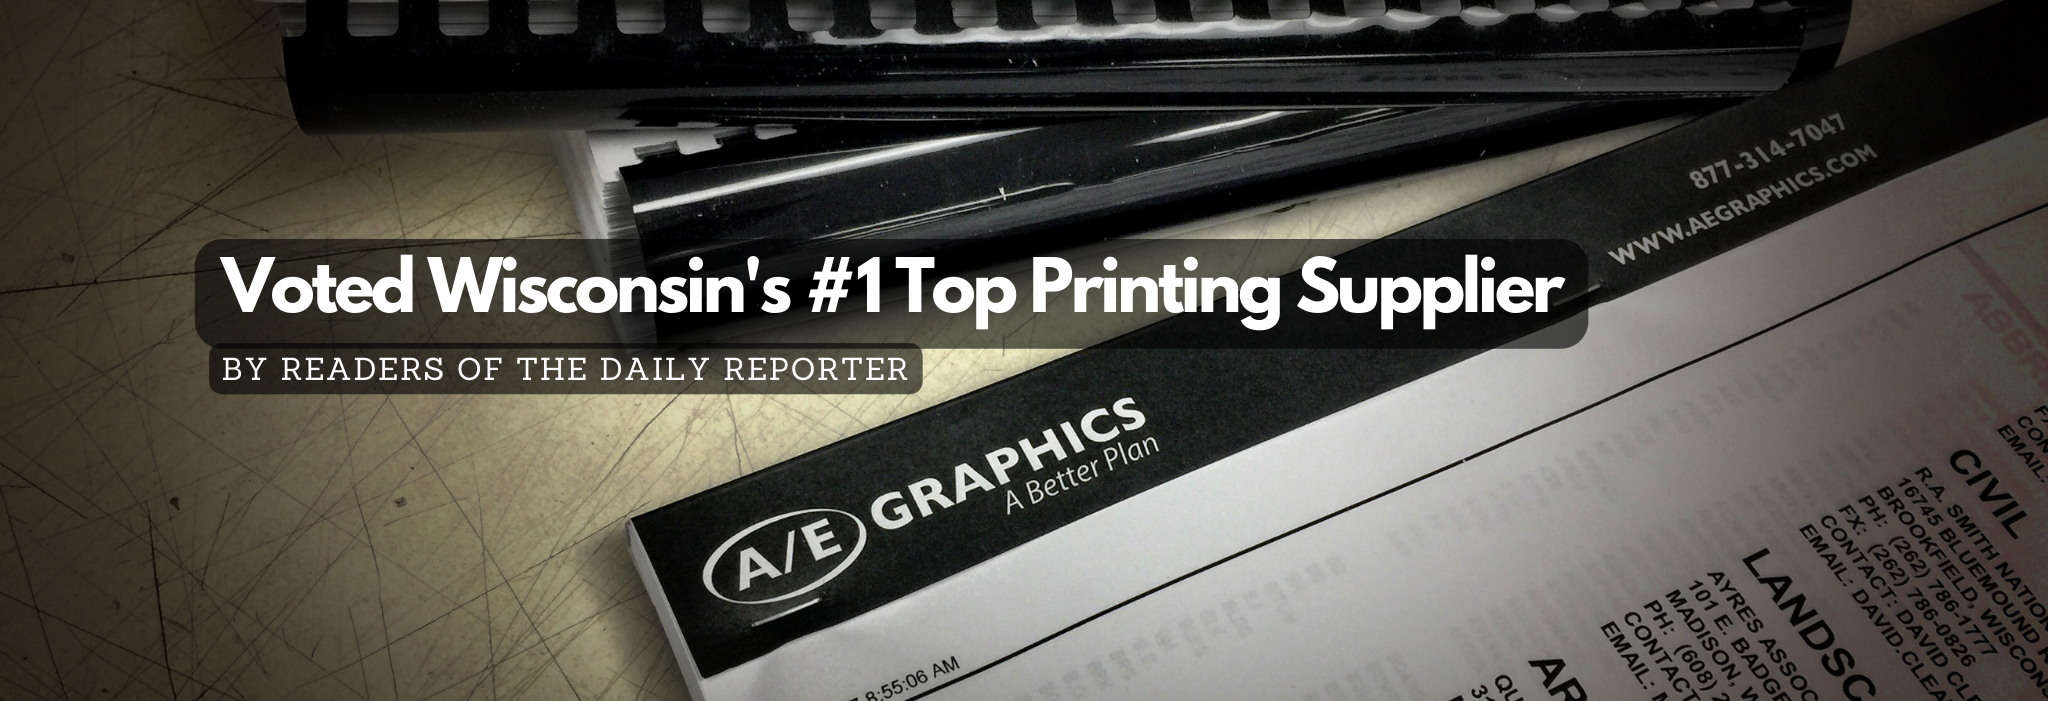 A/E Graphics #1 Top Printing Supplier in Wisconsin